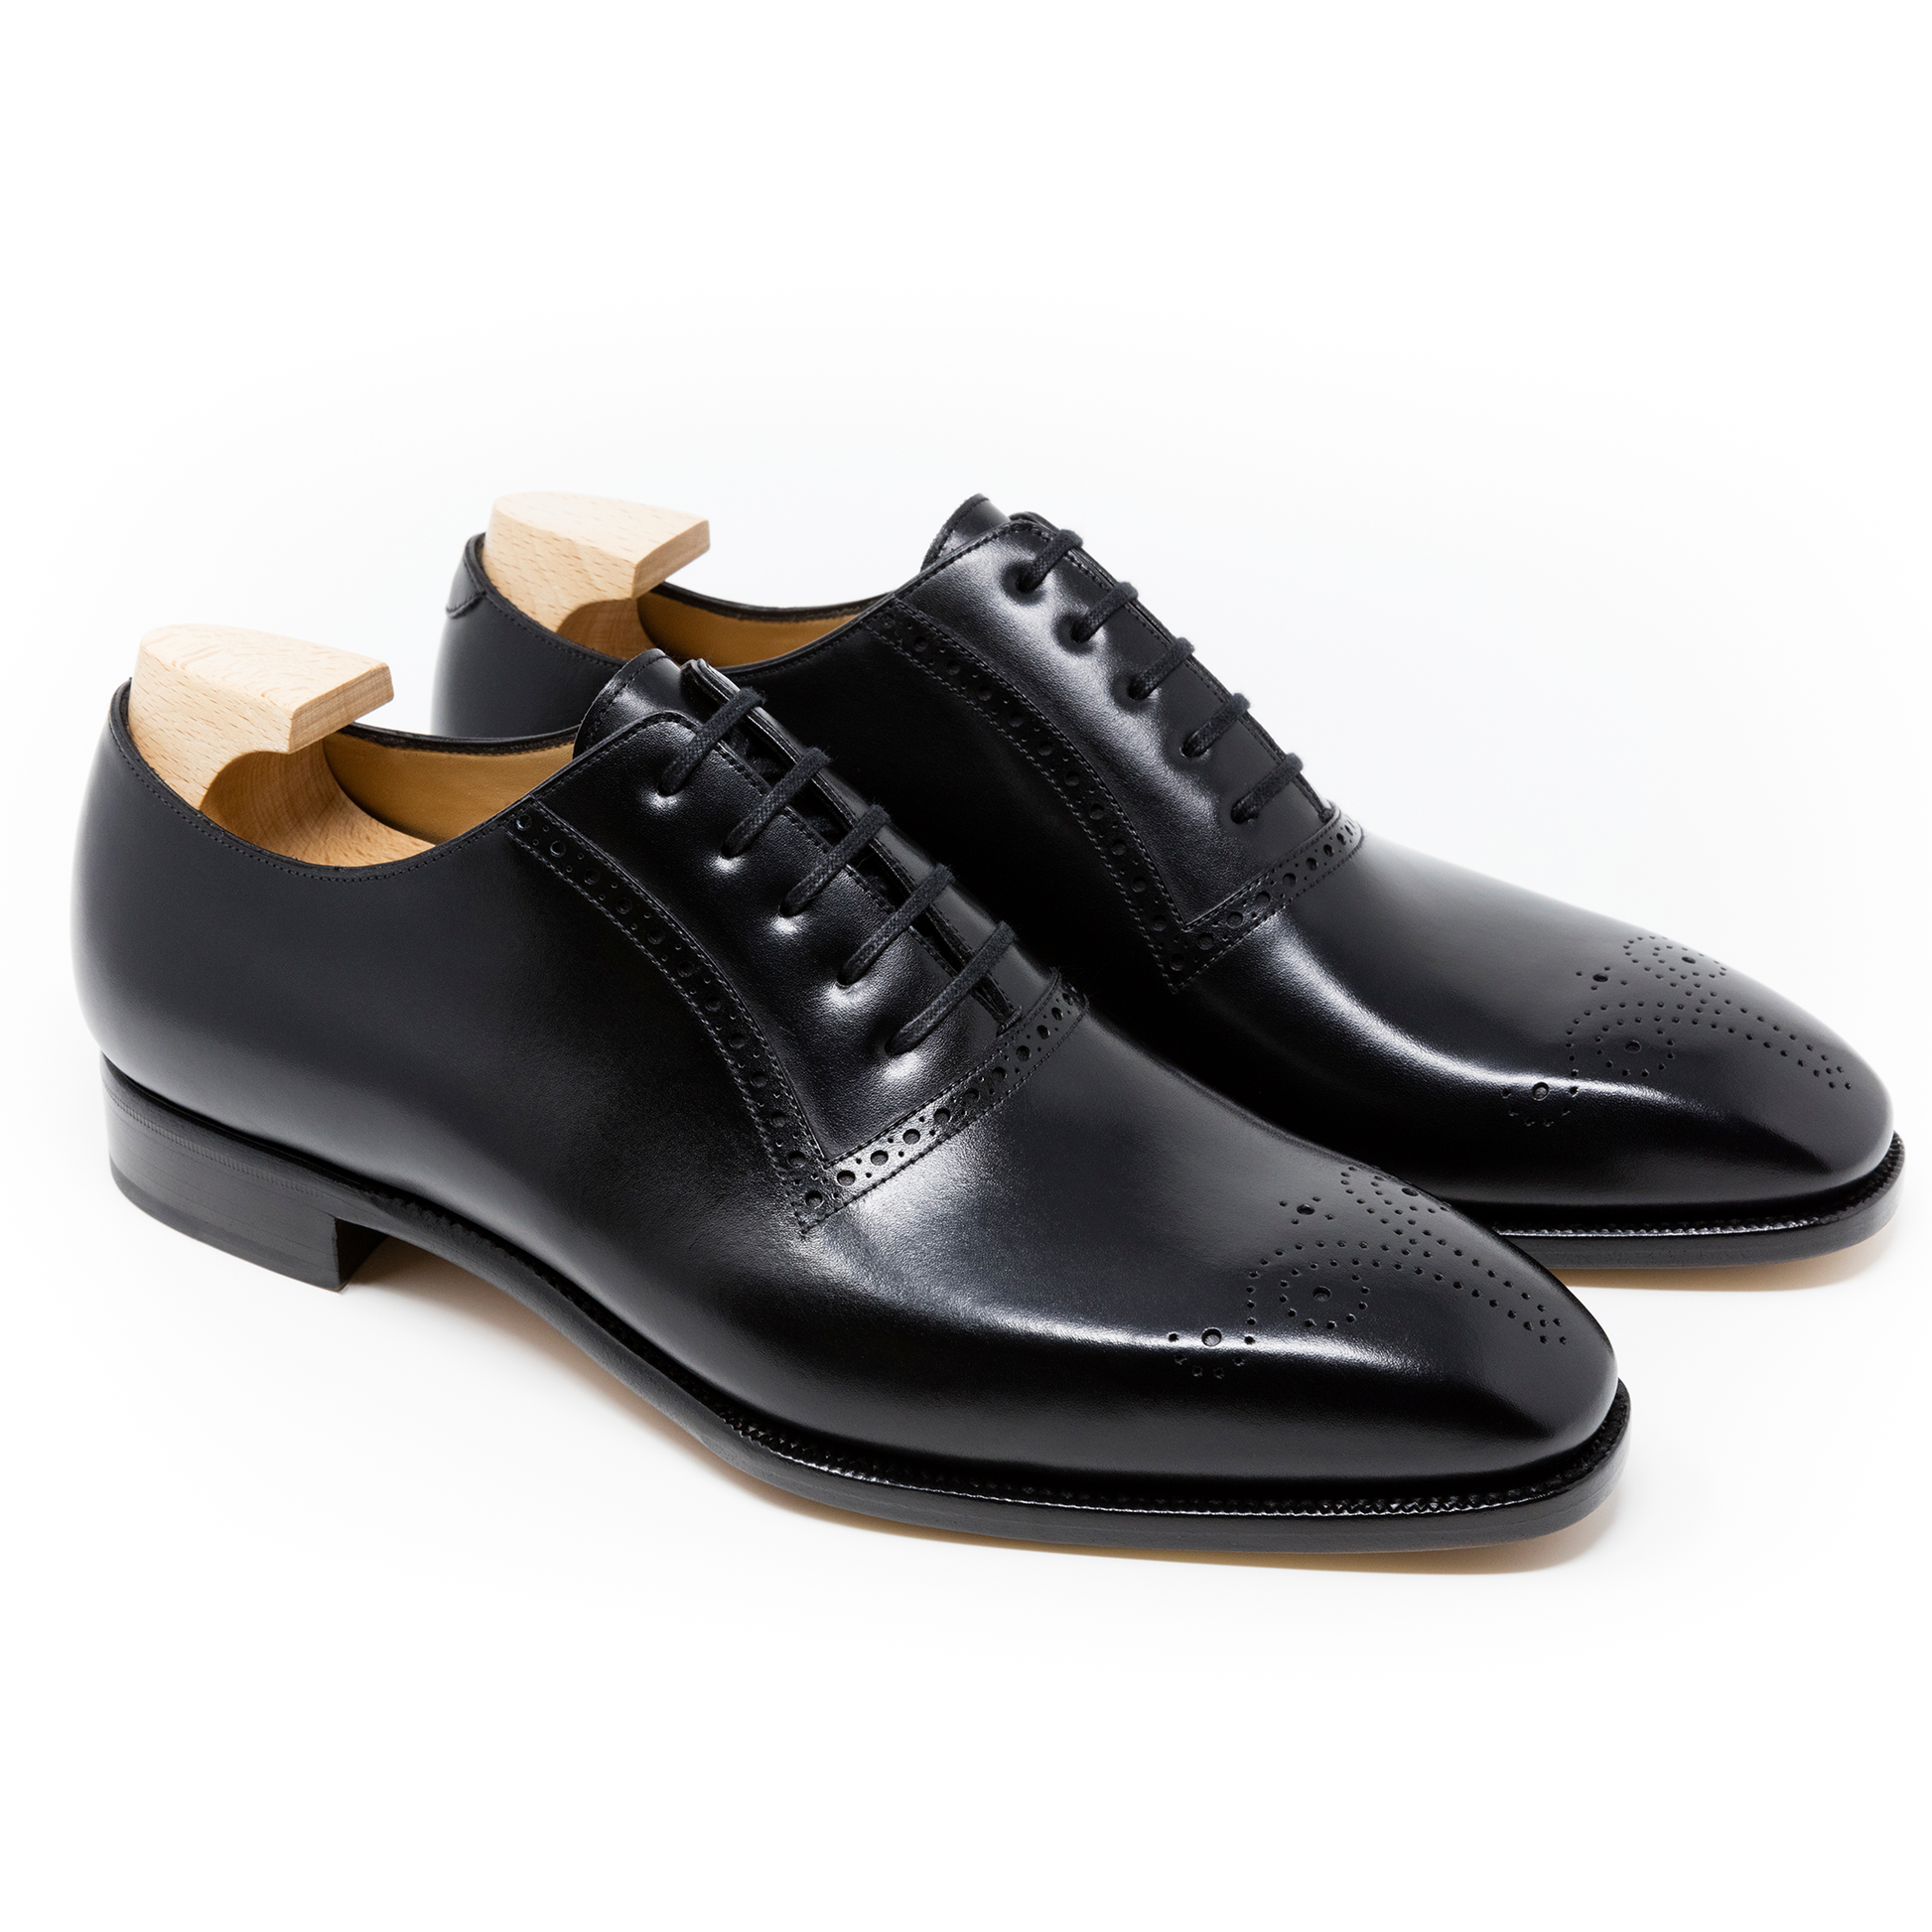 TLB Mallorca leather shoes 107 / PICASSO / BOXCALF BLACK